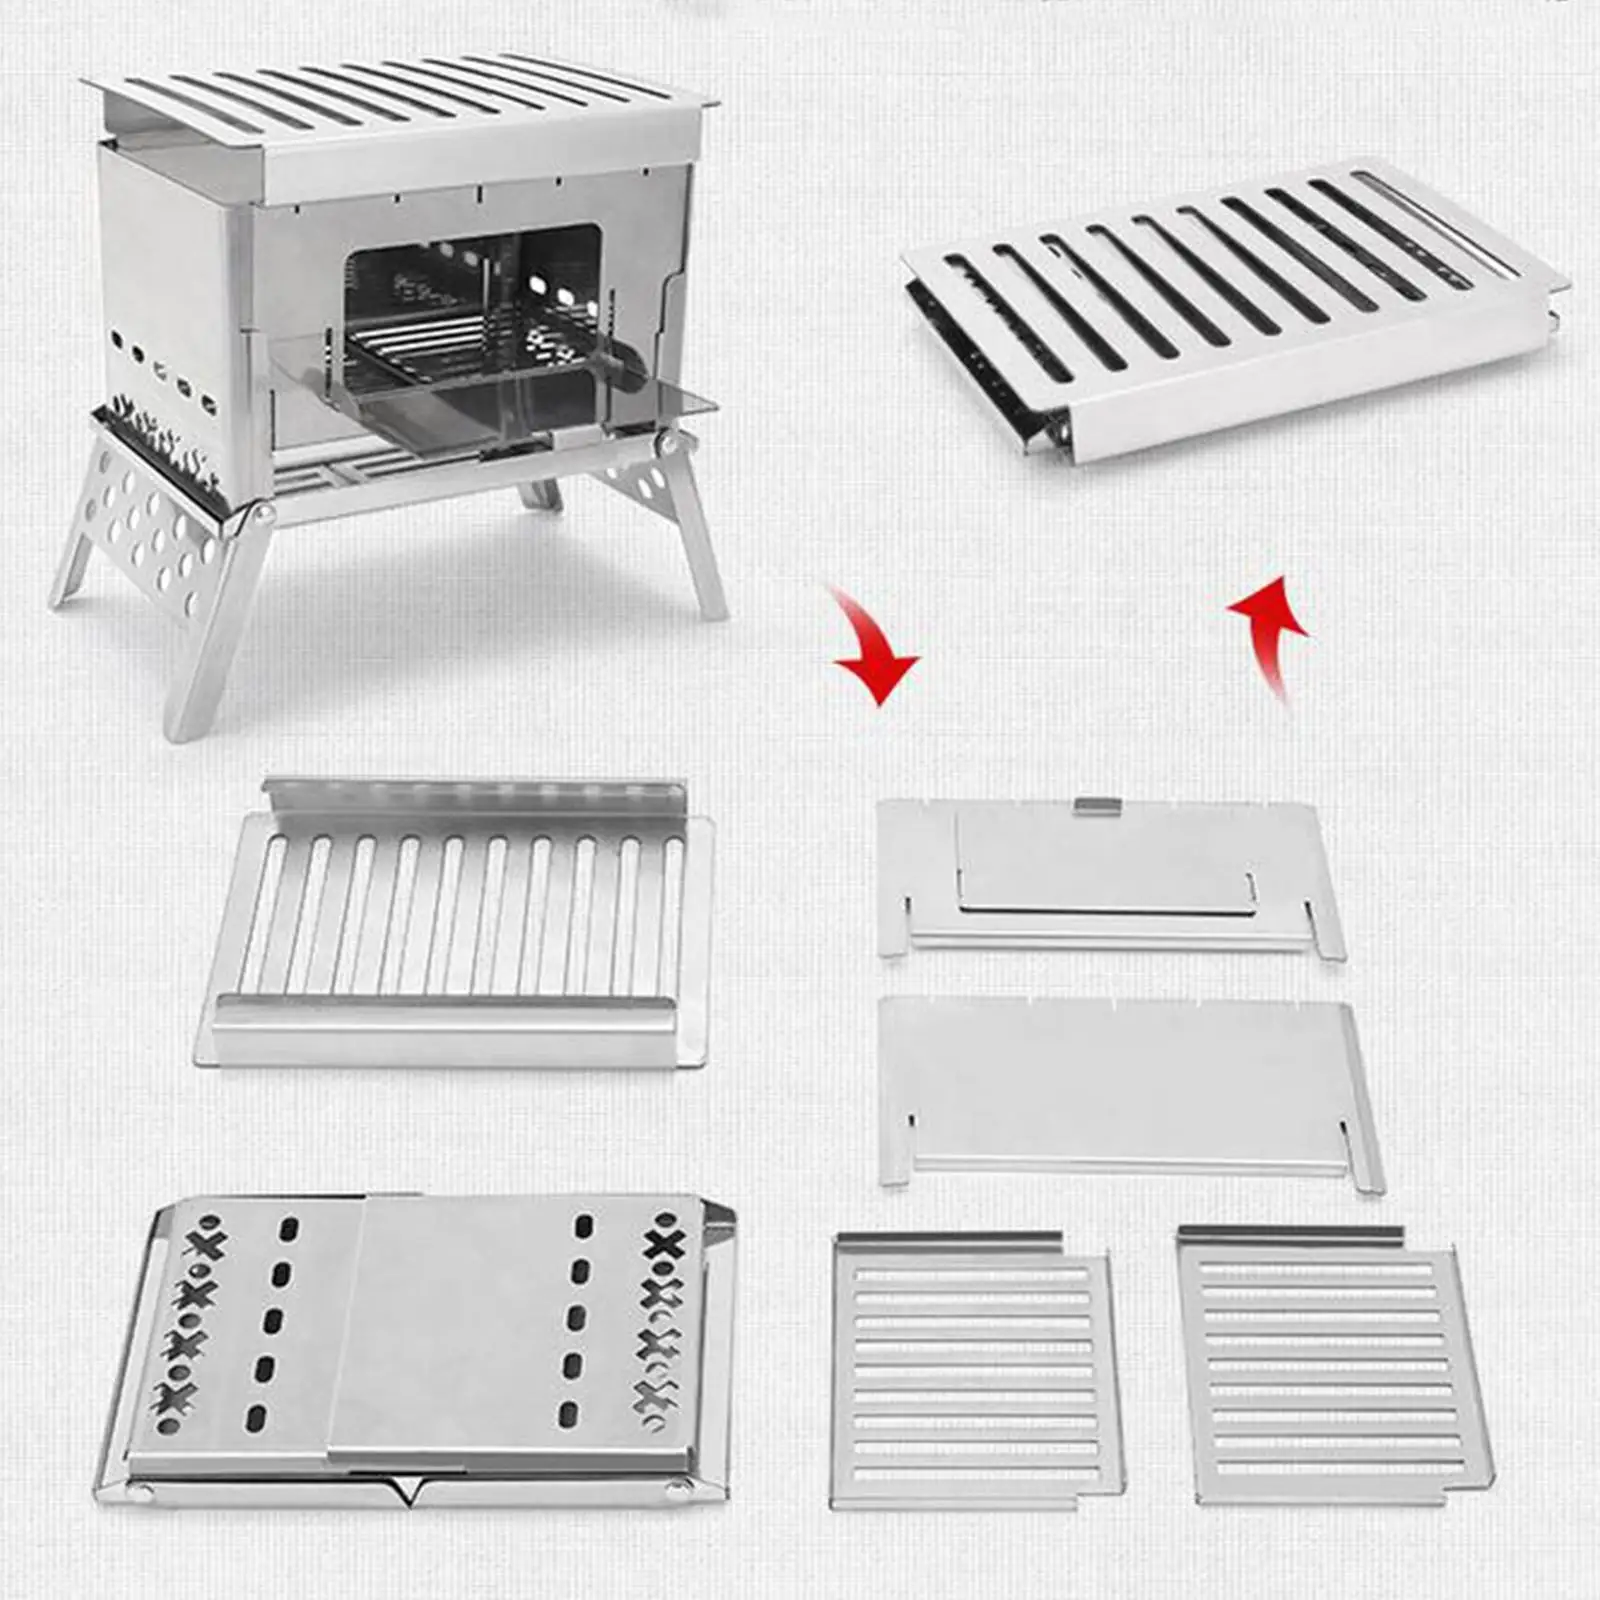 Portable Camping Grill Stove Cooking Grill Firewood Burning Stove Foldable Lightweight Mini for Cooking Traveling Garden Fishing